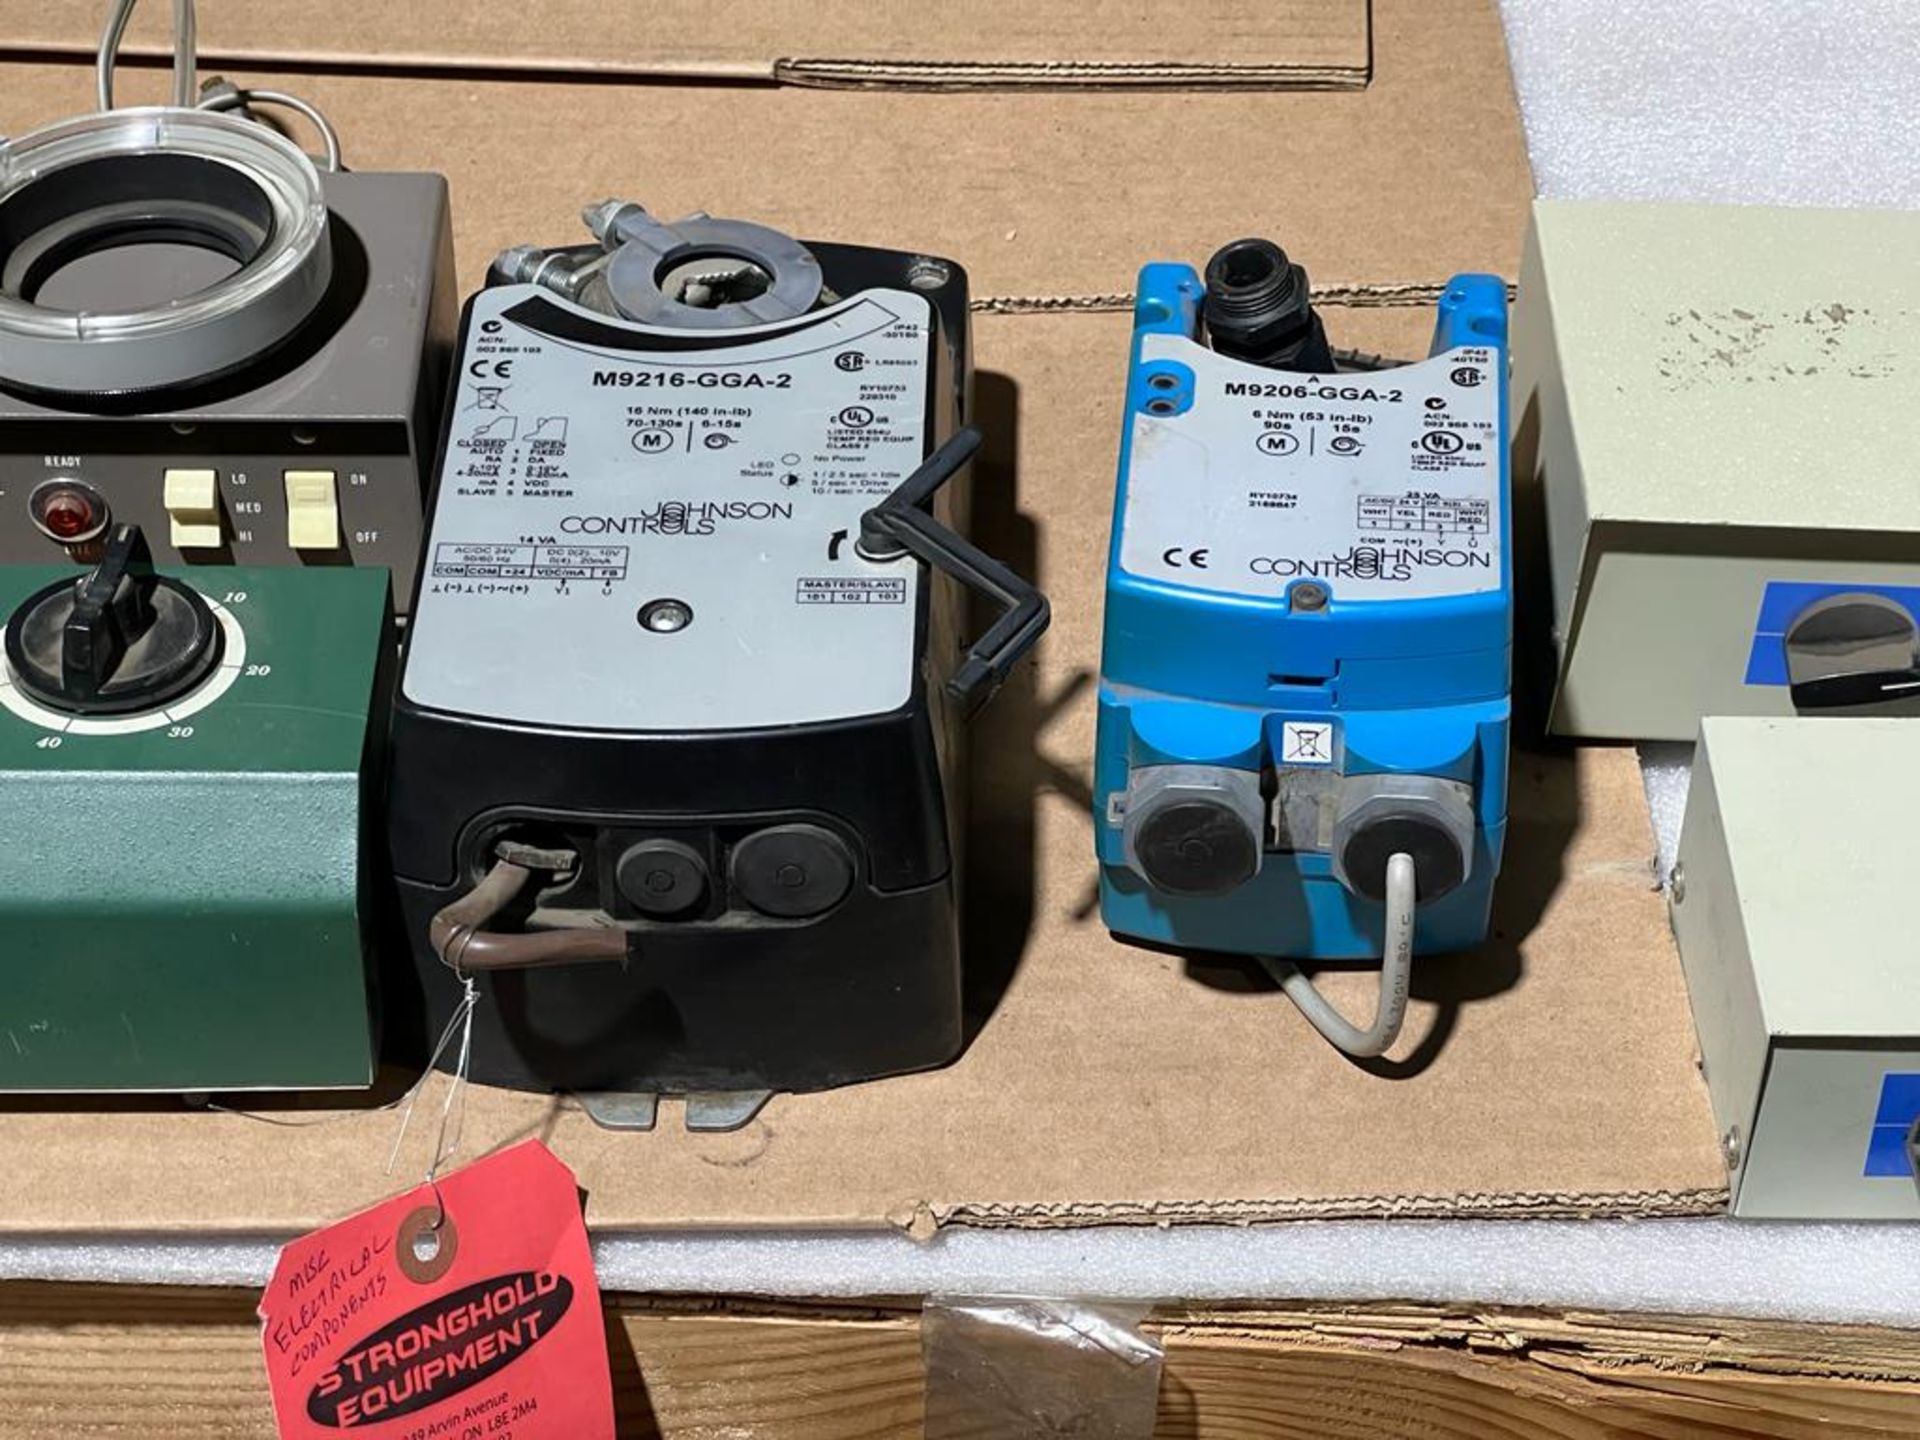 Lot of 6 (6 units) Testers and Controllers - Johnson Controls, EPROM ERASER model LER-121A, - Image 2 of 4